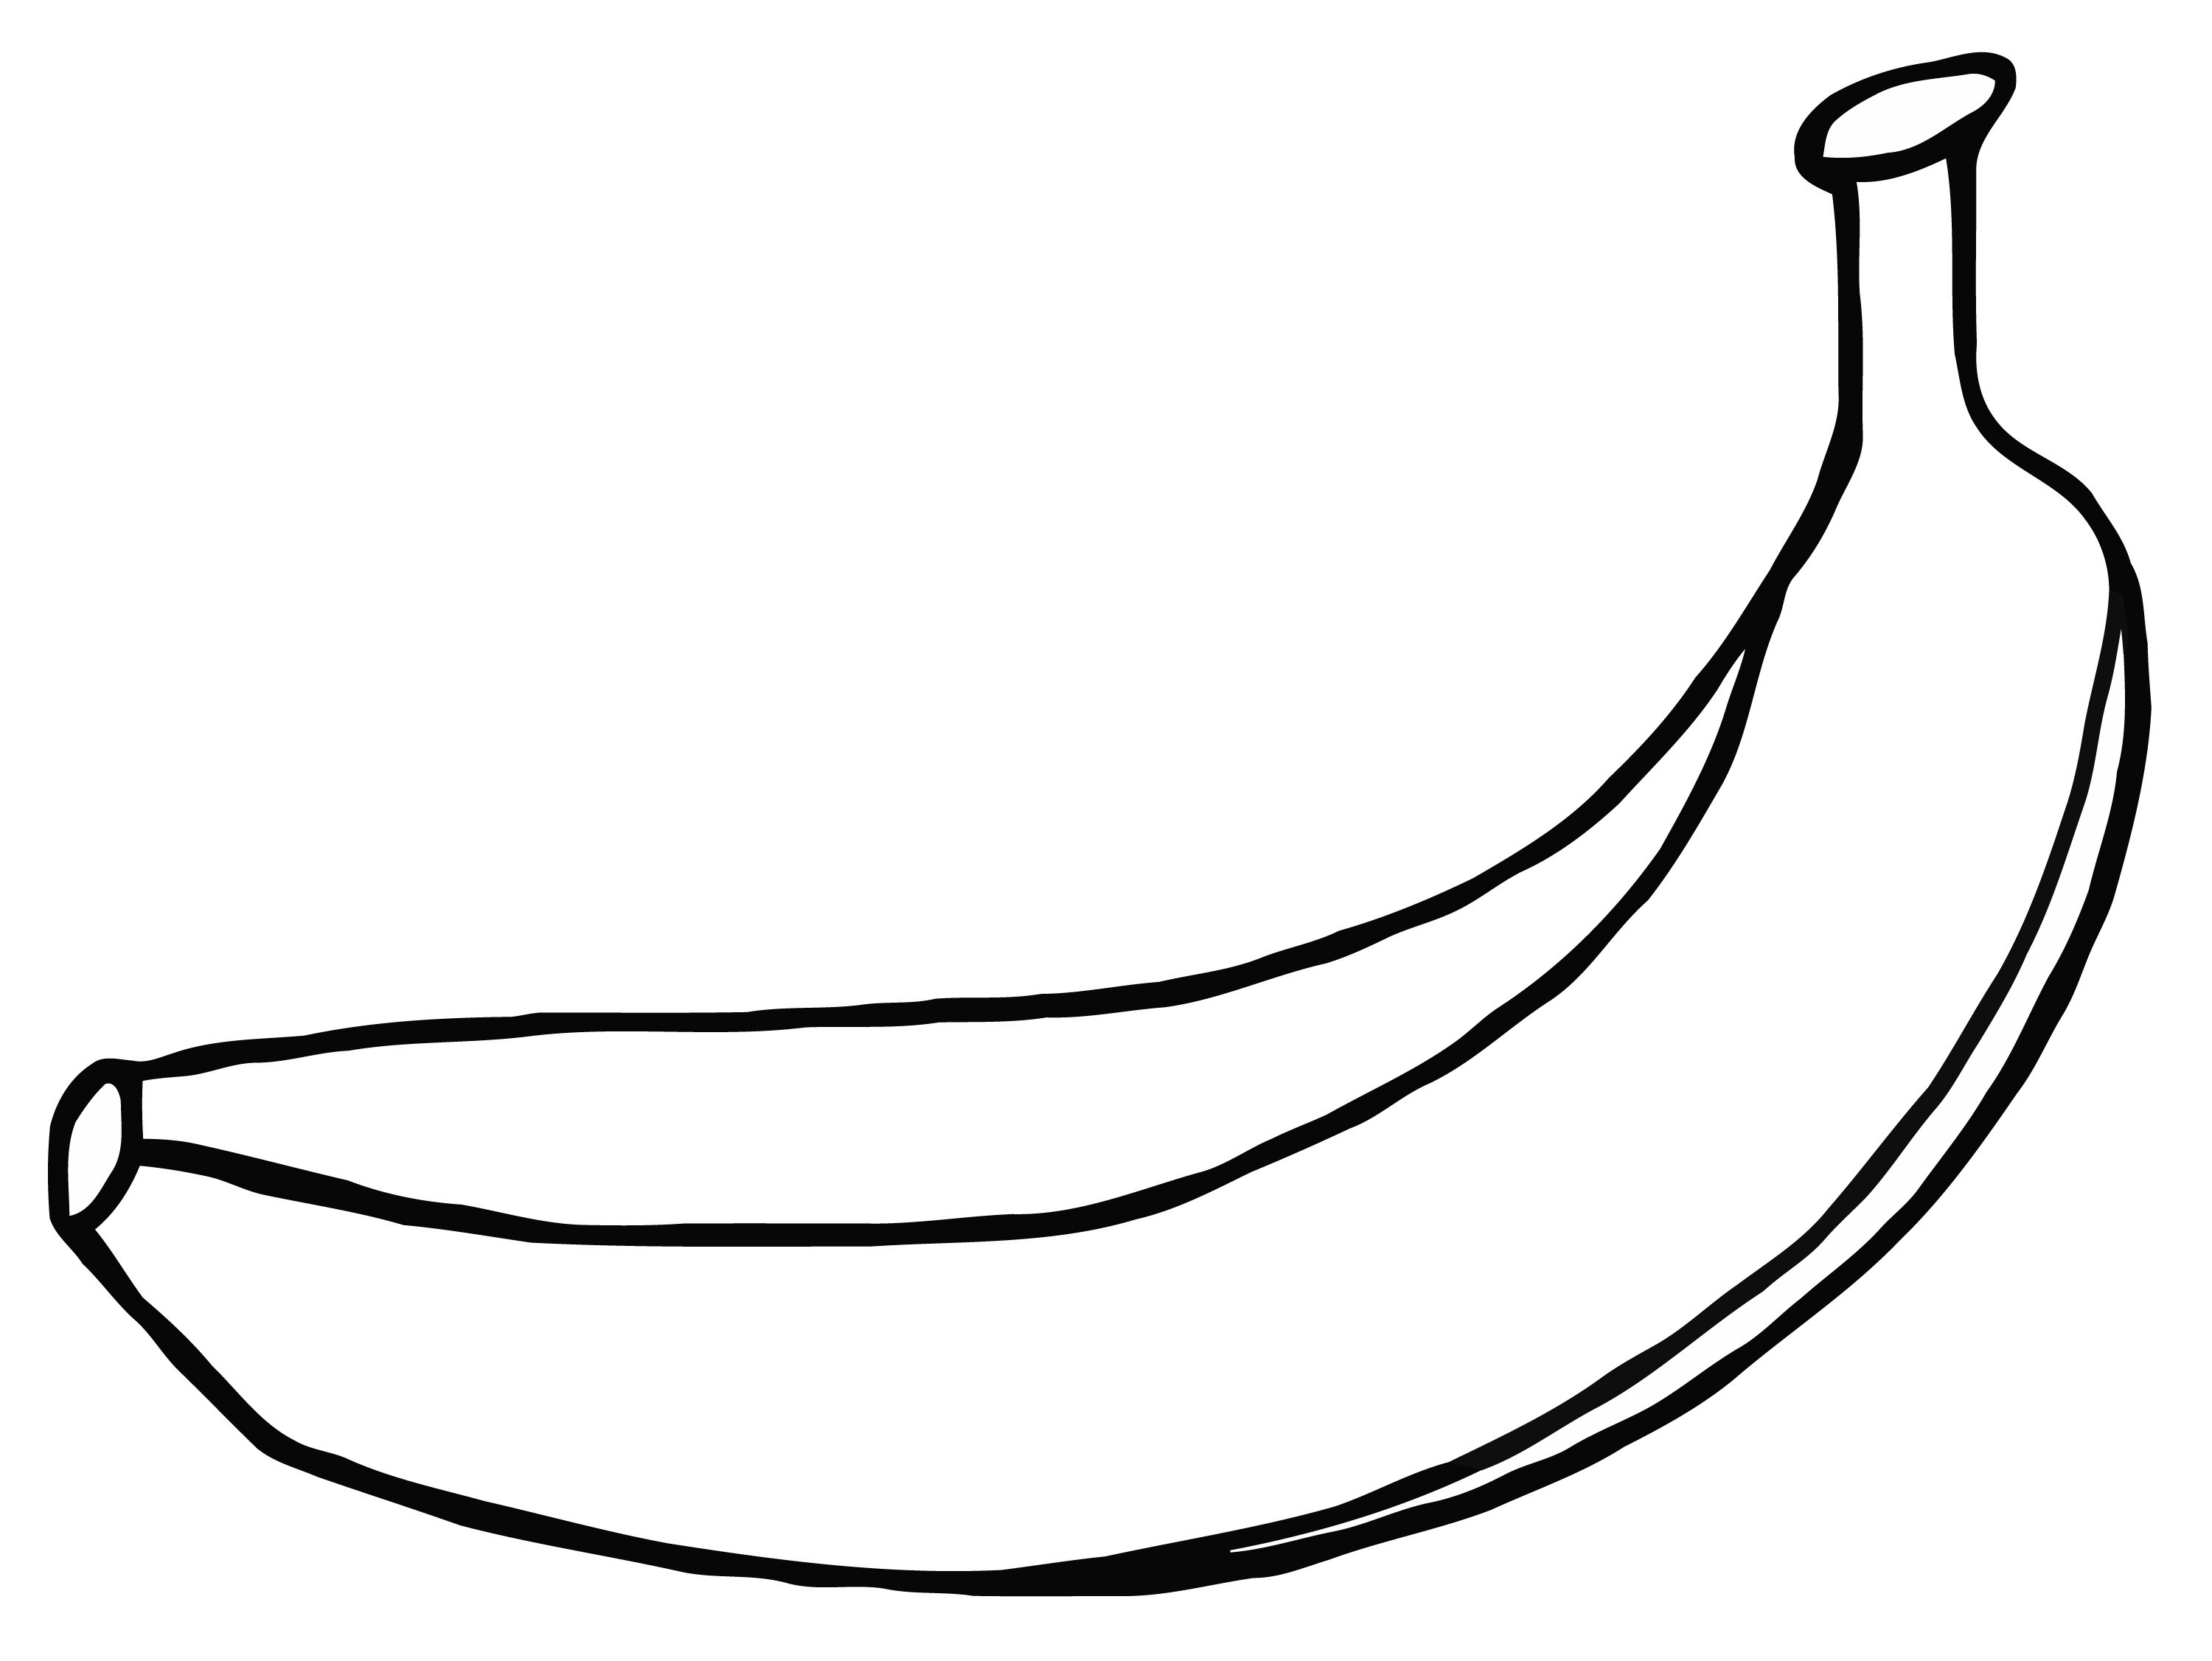 colouring-pages-banana-clip-art-library